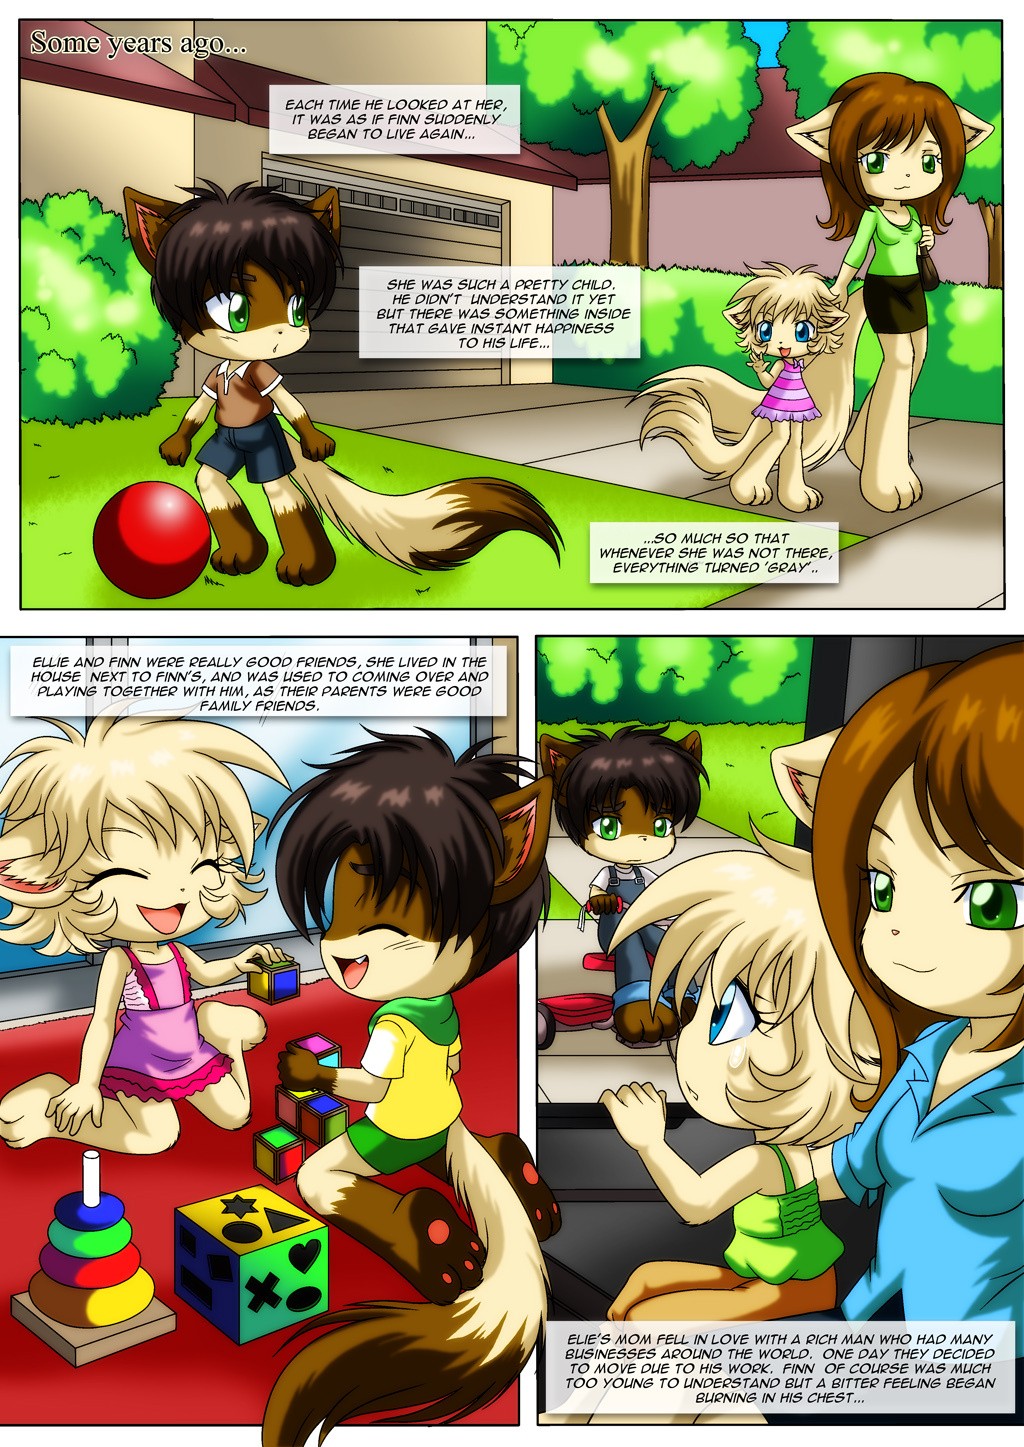 Little Tails 6: Missing The Light of The Day porn comic picture 6